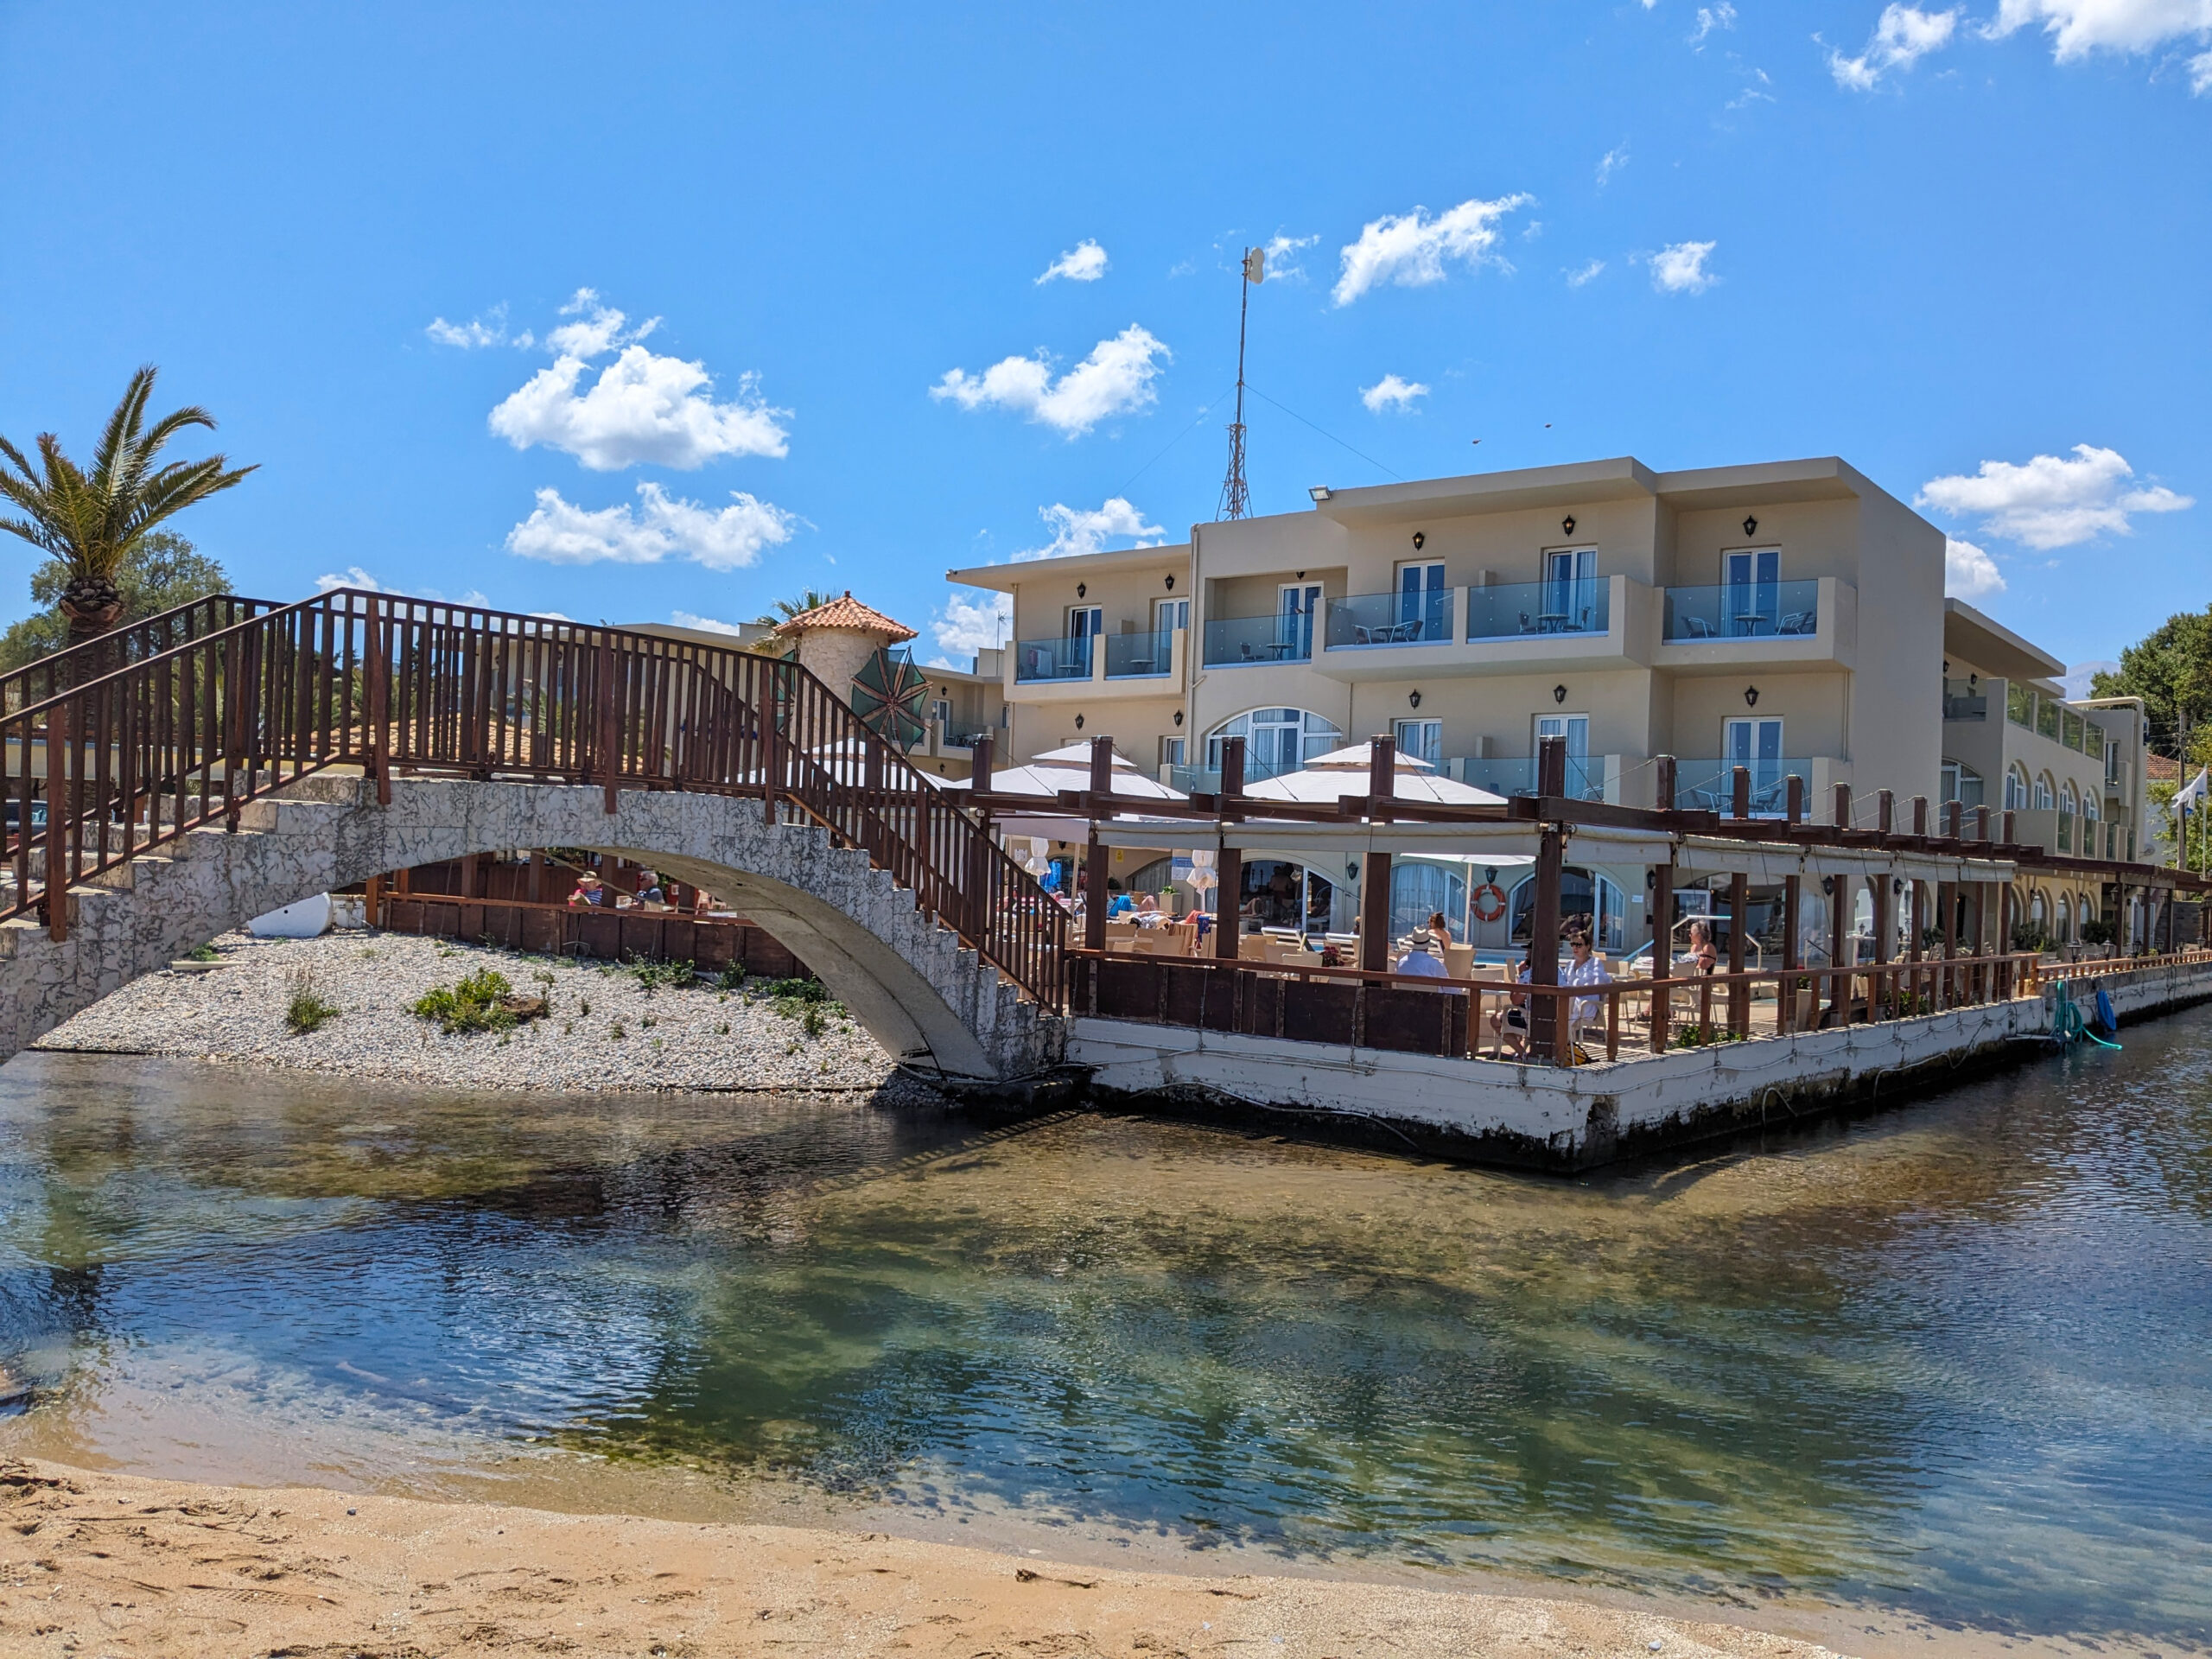 Kalyves Beach Hotel Review, Kalyves Beach Hotel, Crete, Chania, Visit Chania, Family-Friendly Holidays, Family-friendly Hotel, Review, For families, the Frenchie Mummy, Chania Crete, All Inclusive, Hotel Review